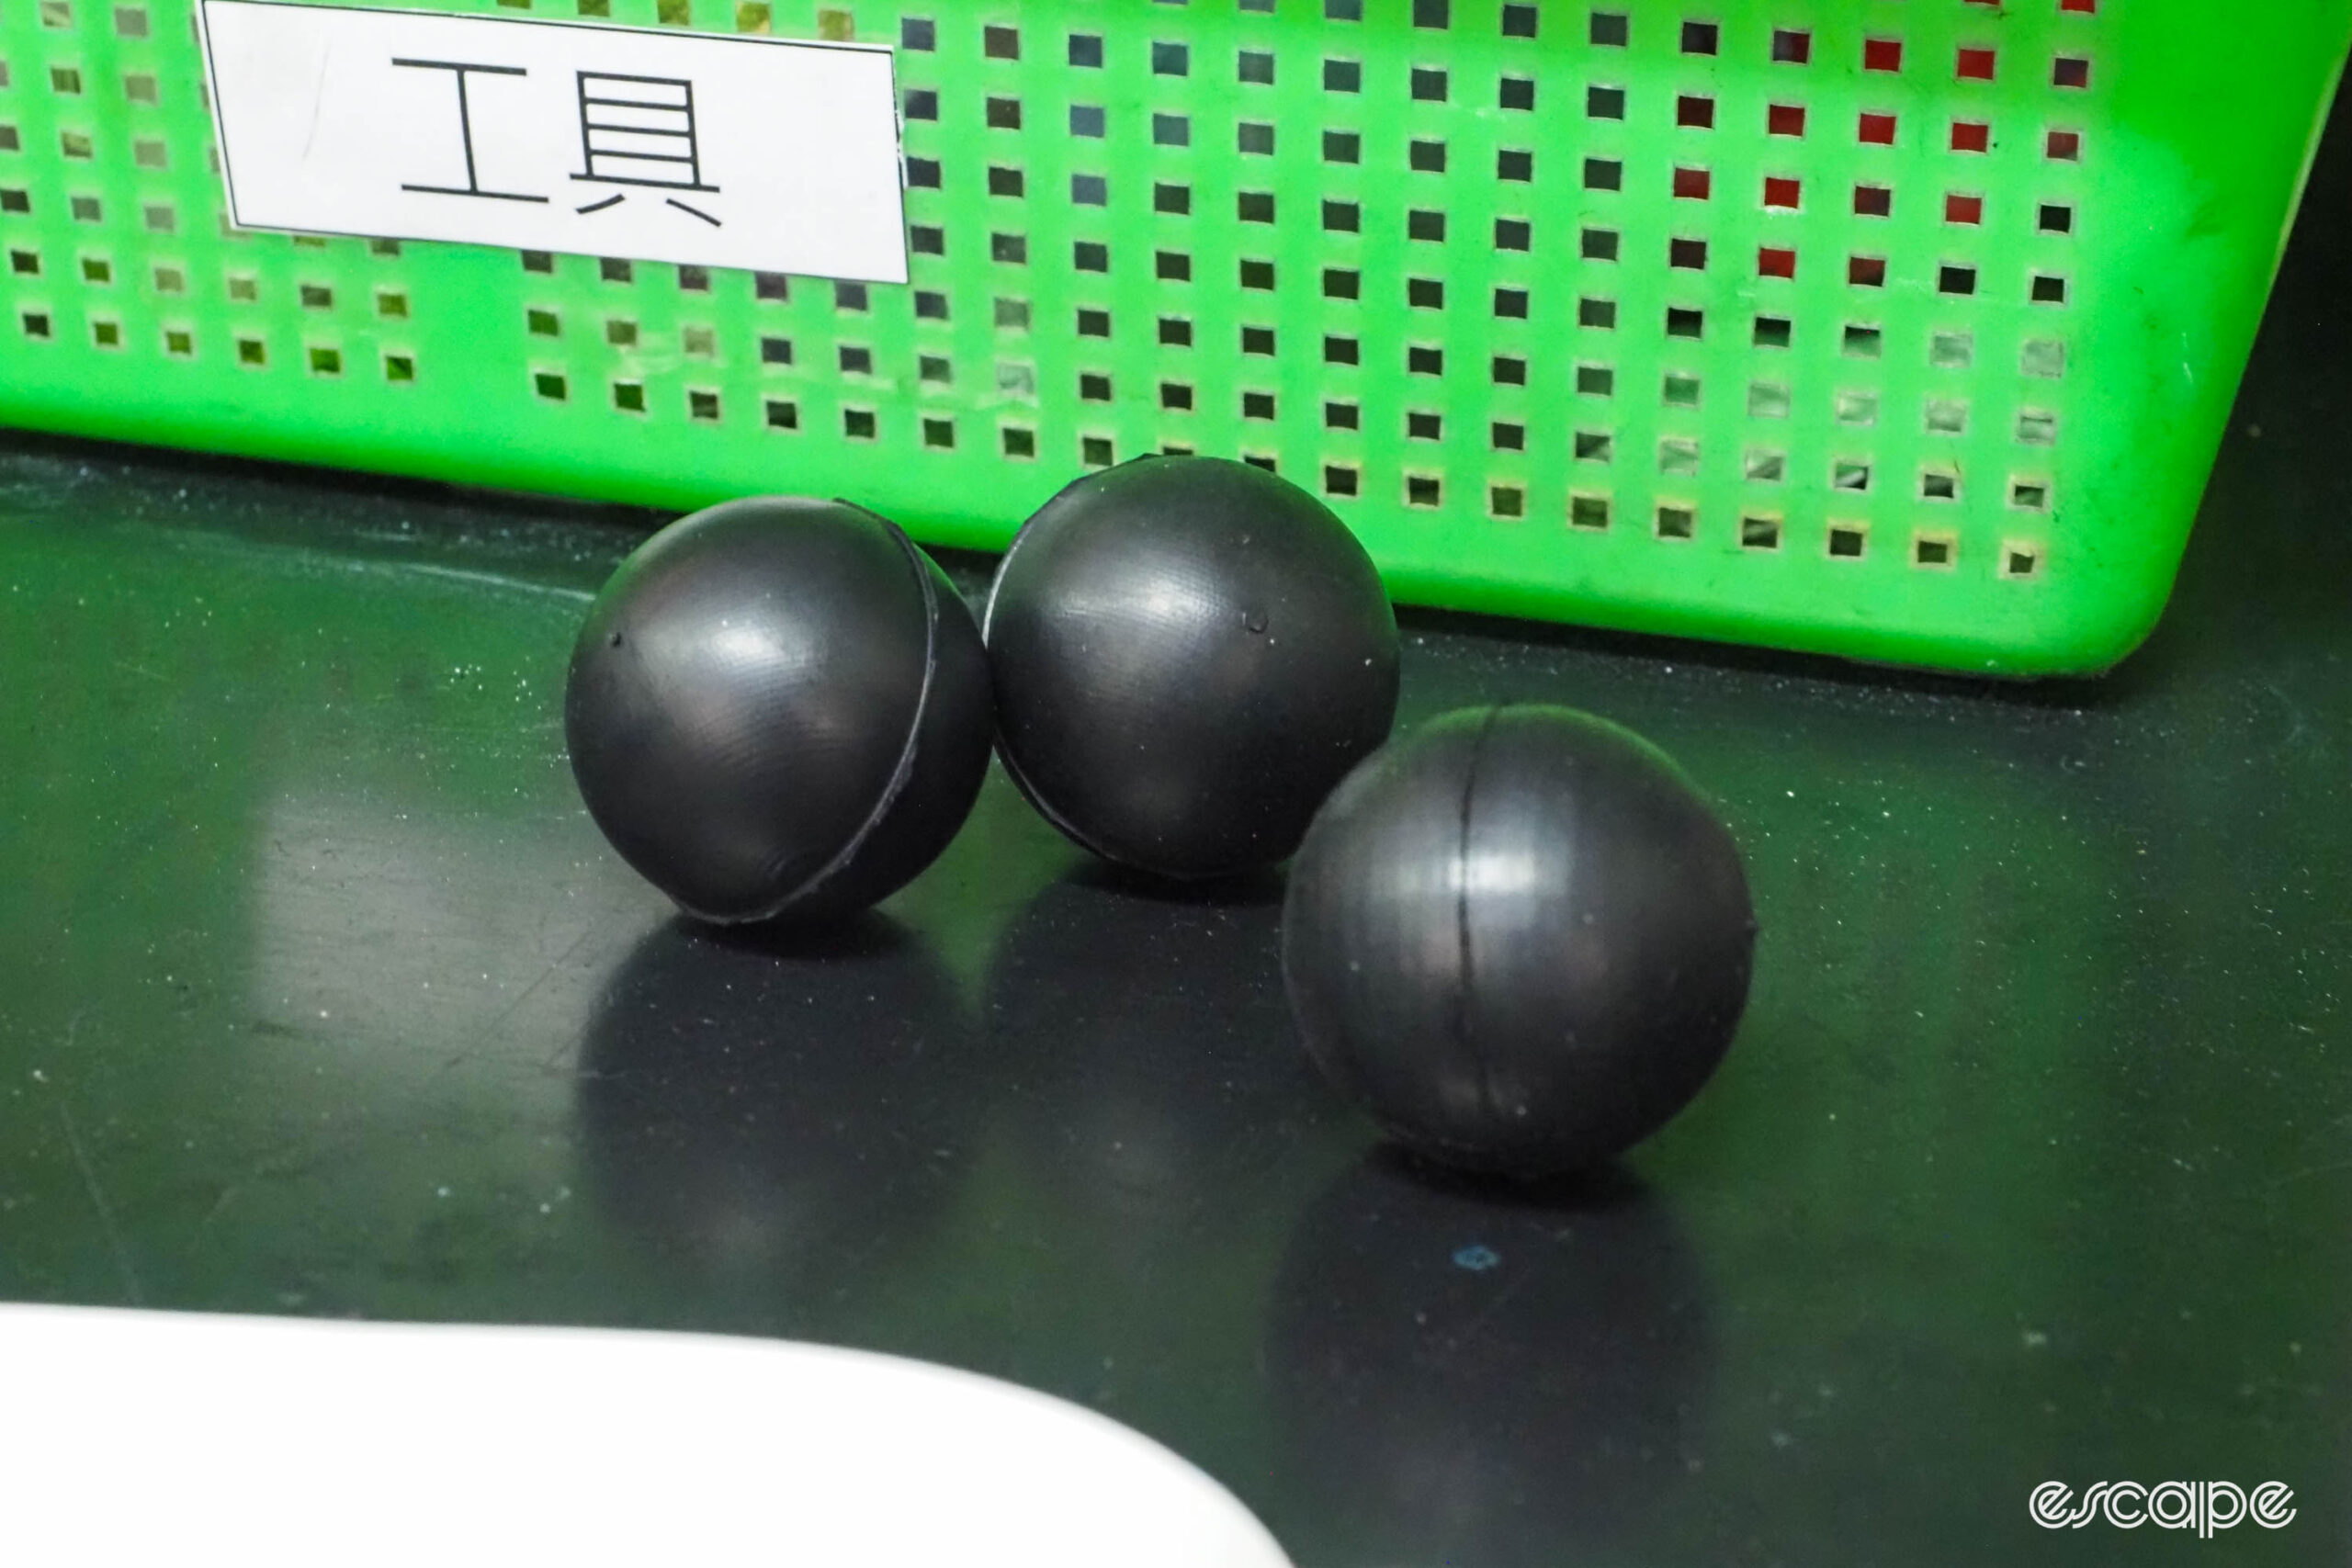 Goodyear Bicycle Tires factory tour rubber balls